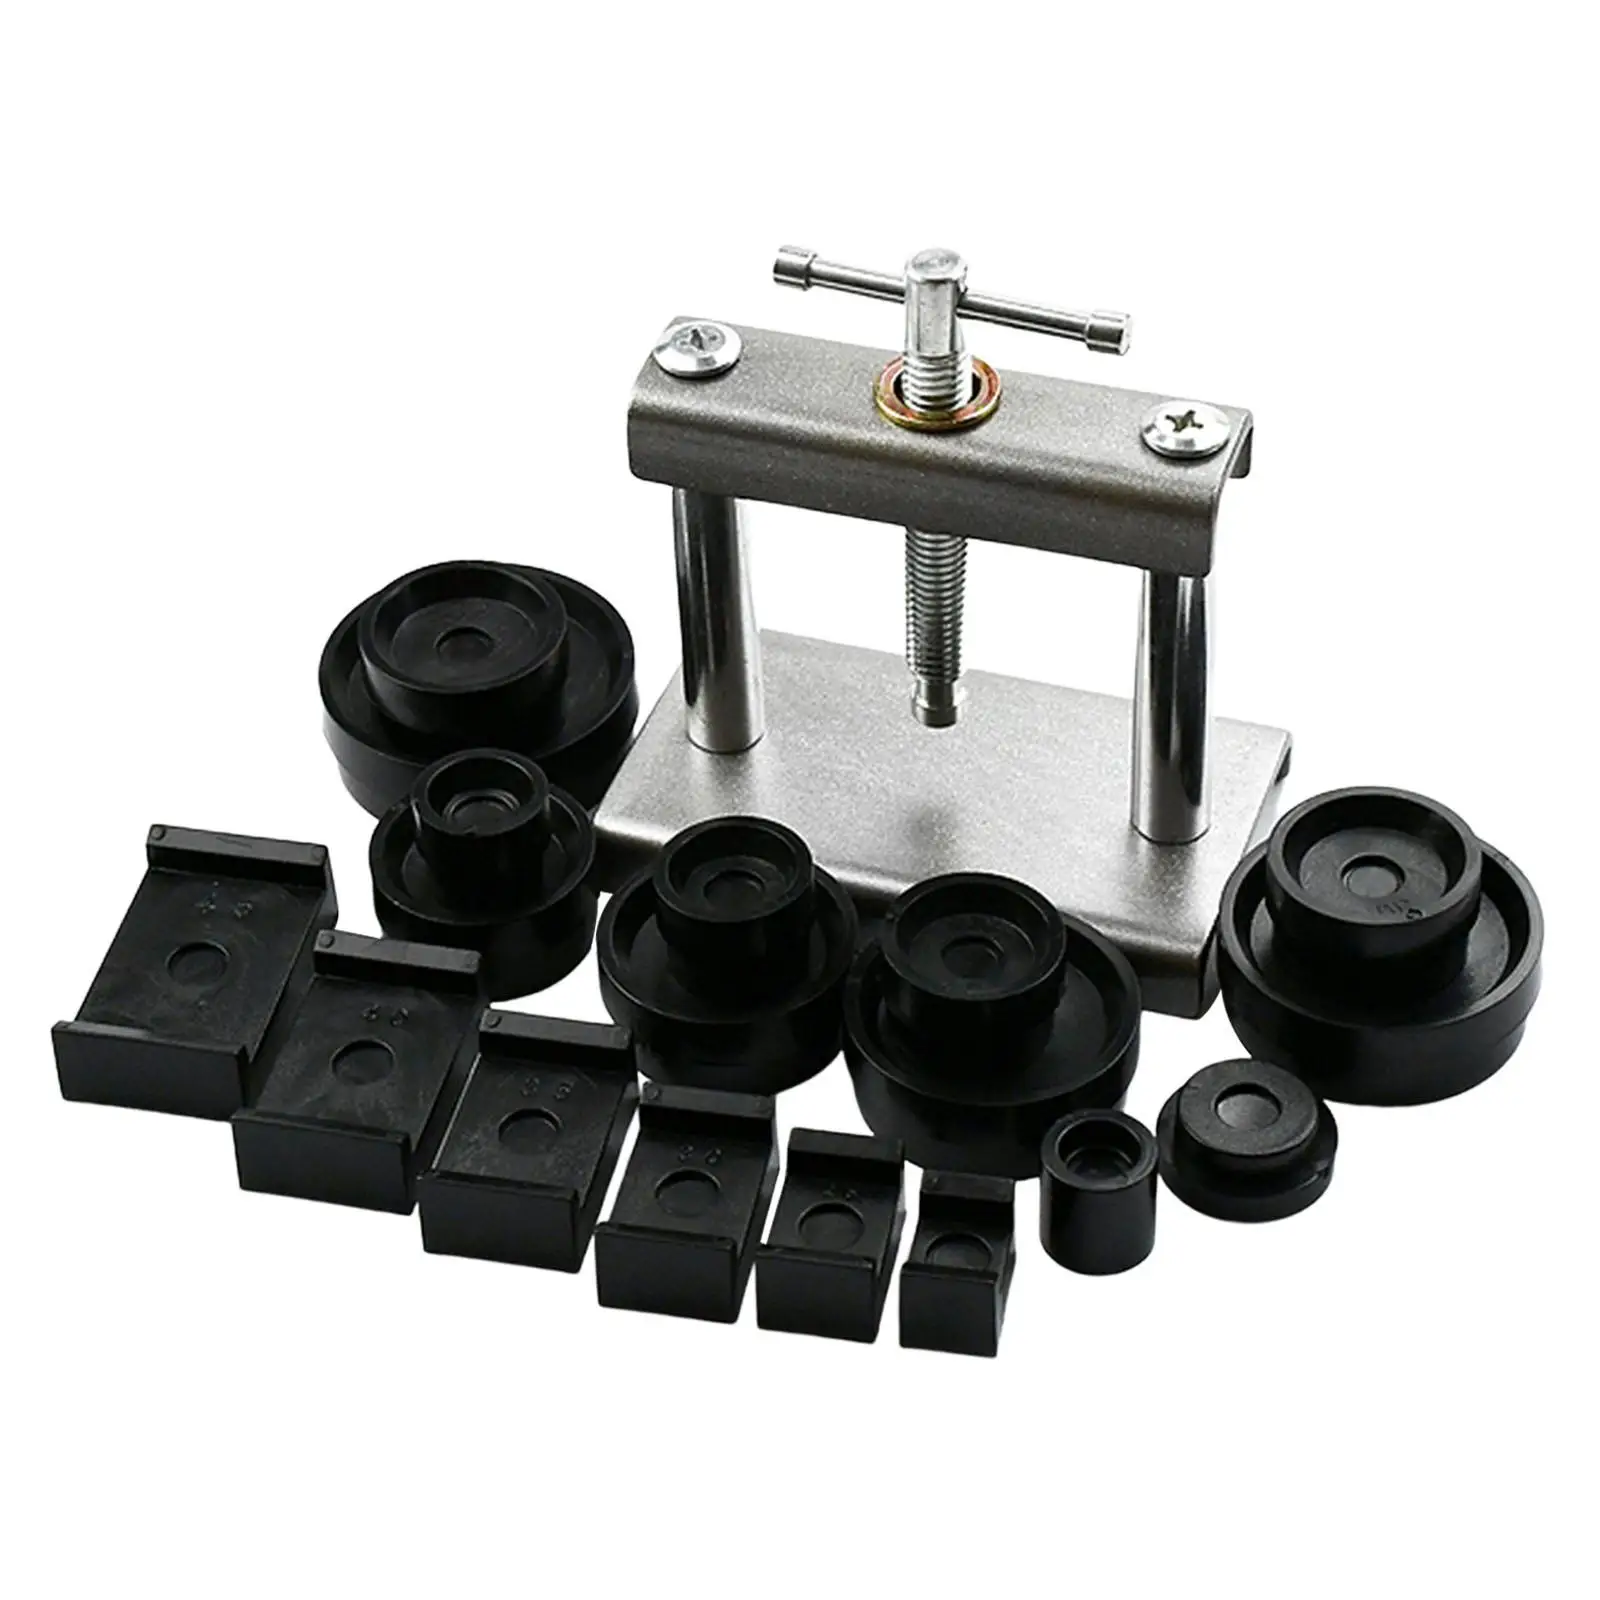 Watch Press Set 13Pcs Fitting Dies Watch press Repair tool Adjustment Tool Kit for Various Kinds of Watch